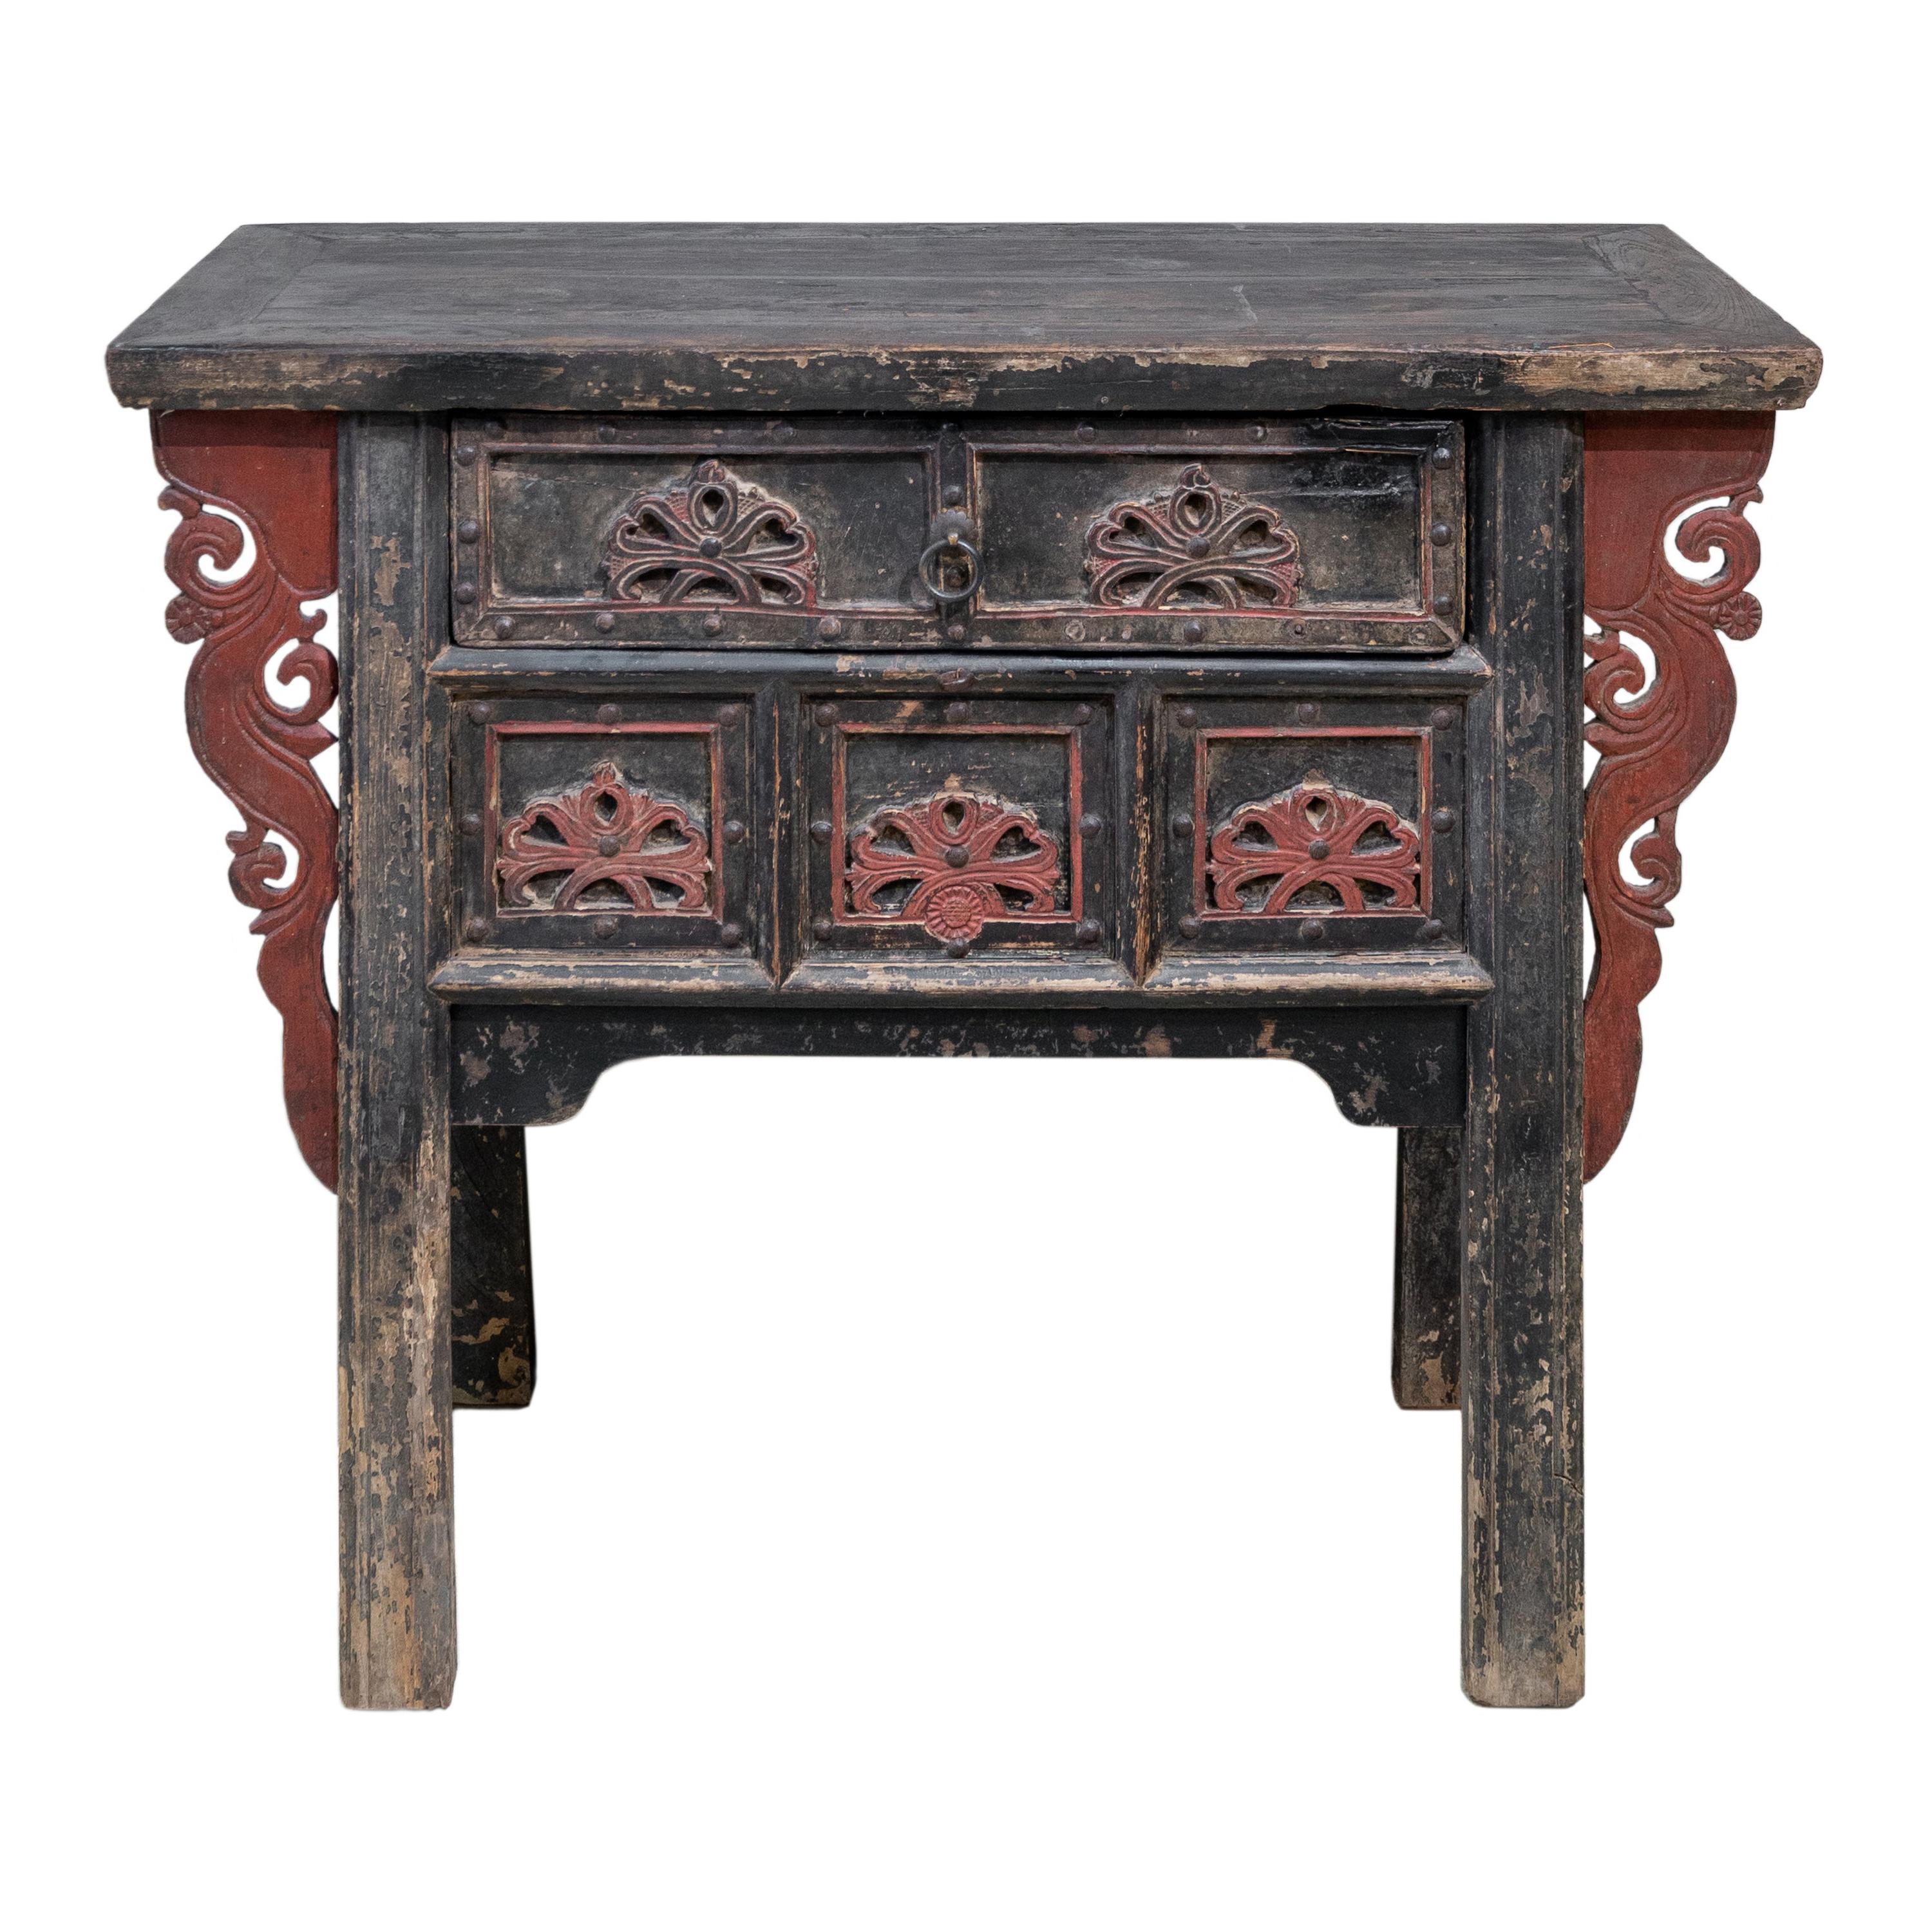 Early 19th Century Carved Coffer Table from Shanxi, China